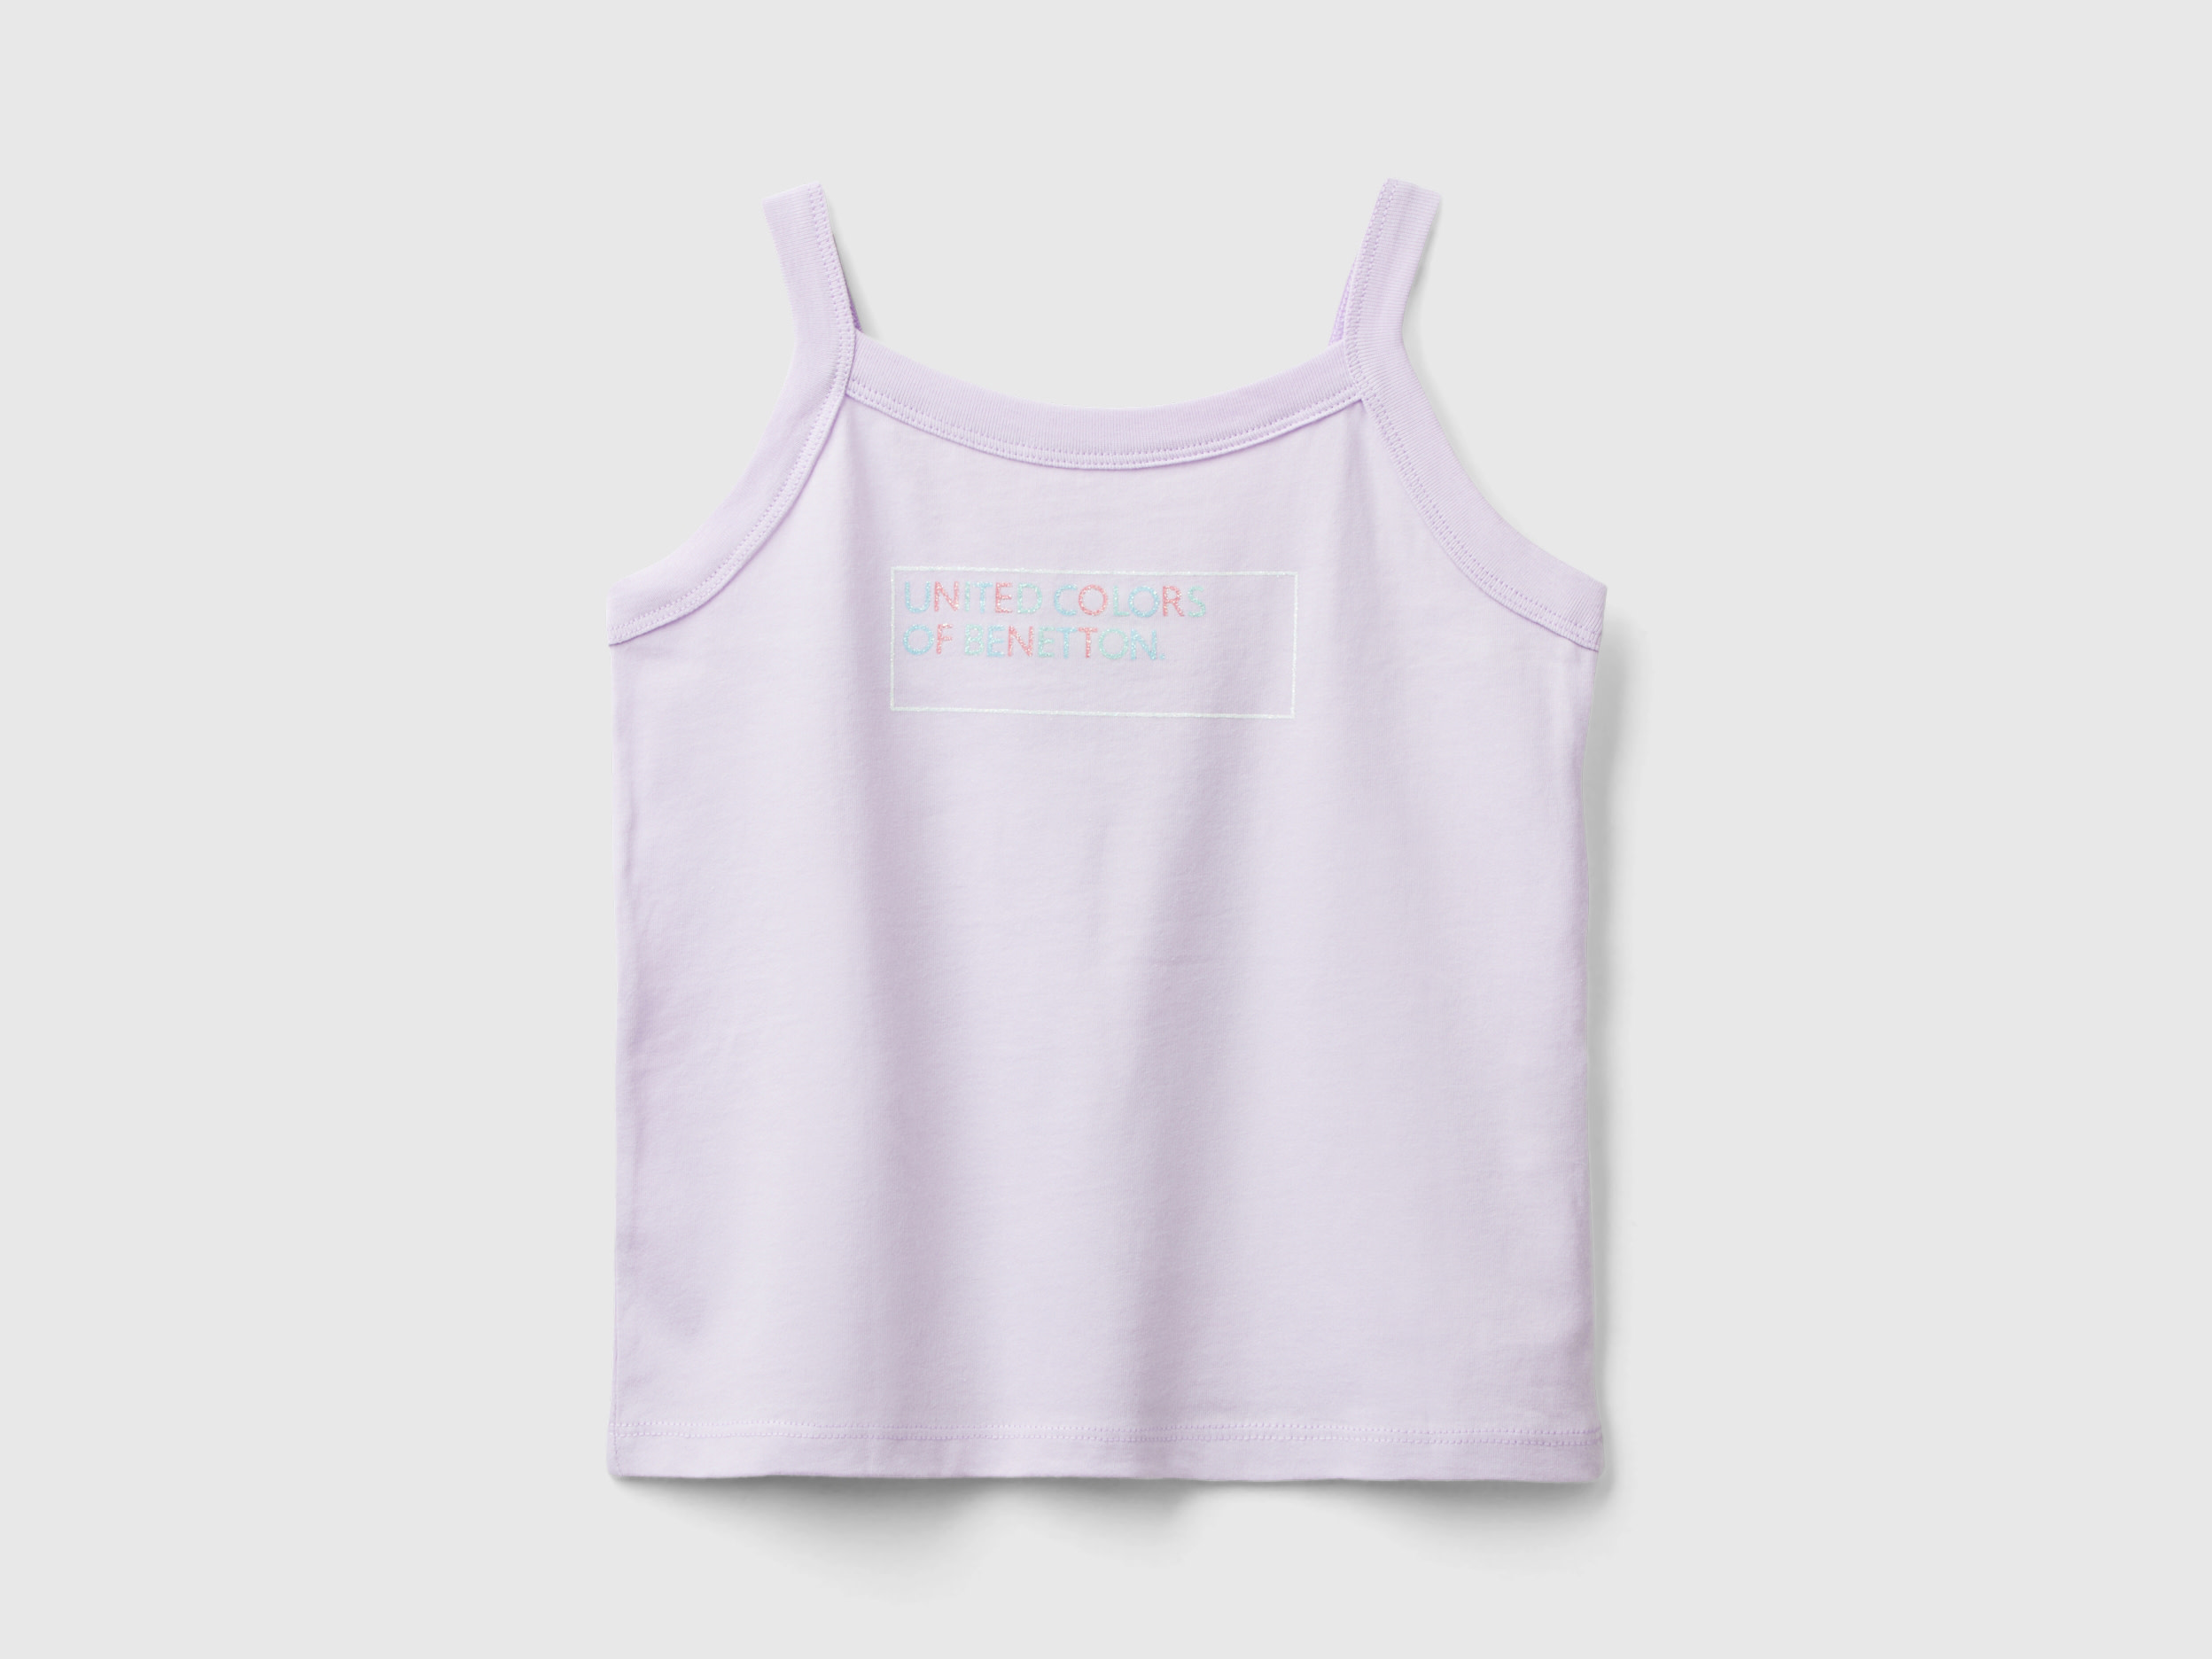 Image of Benetton, Tank Top With Glittery Logo Print, size 2XL, Lilac, Kids